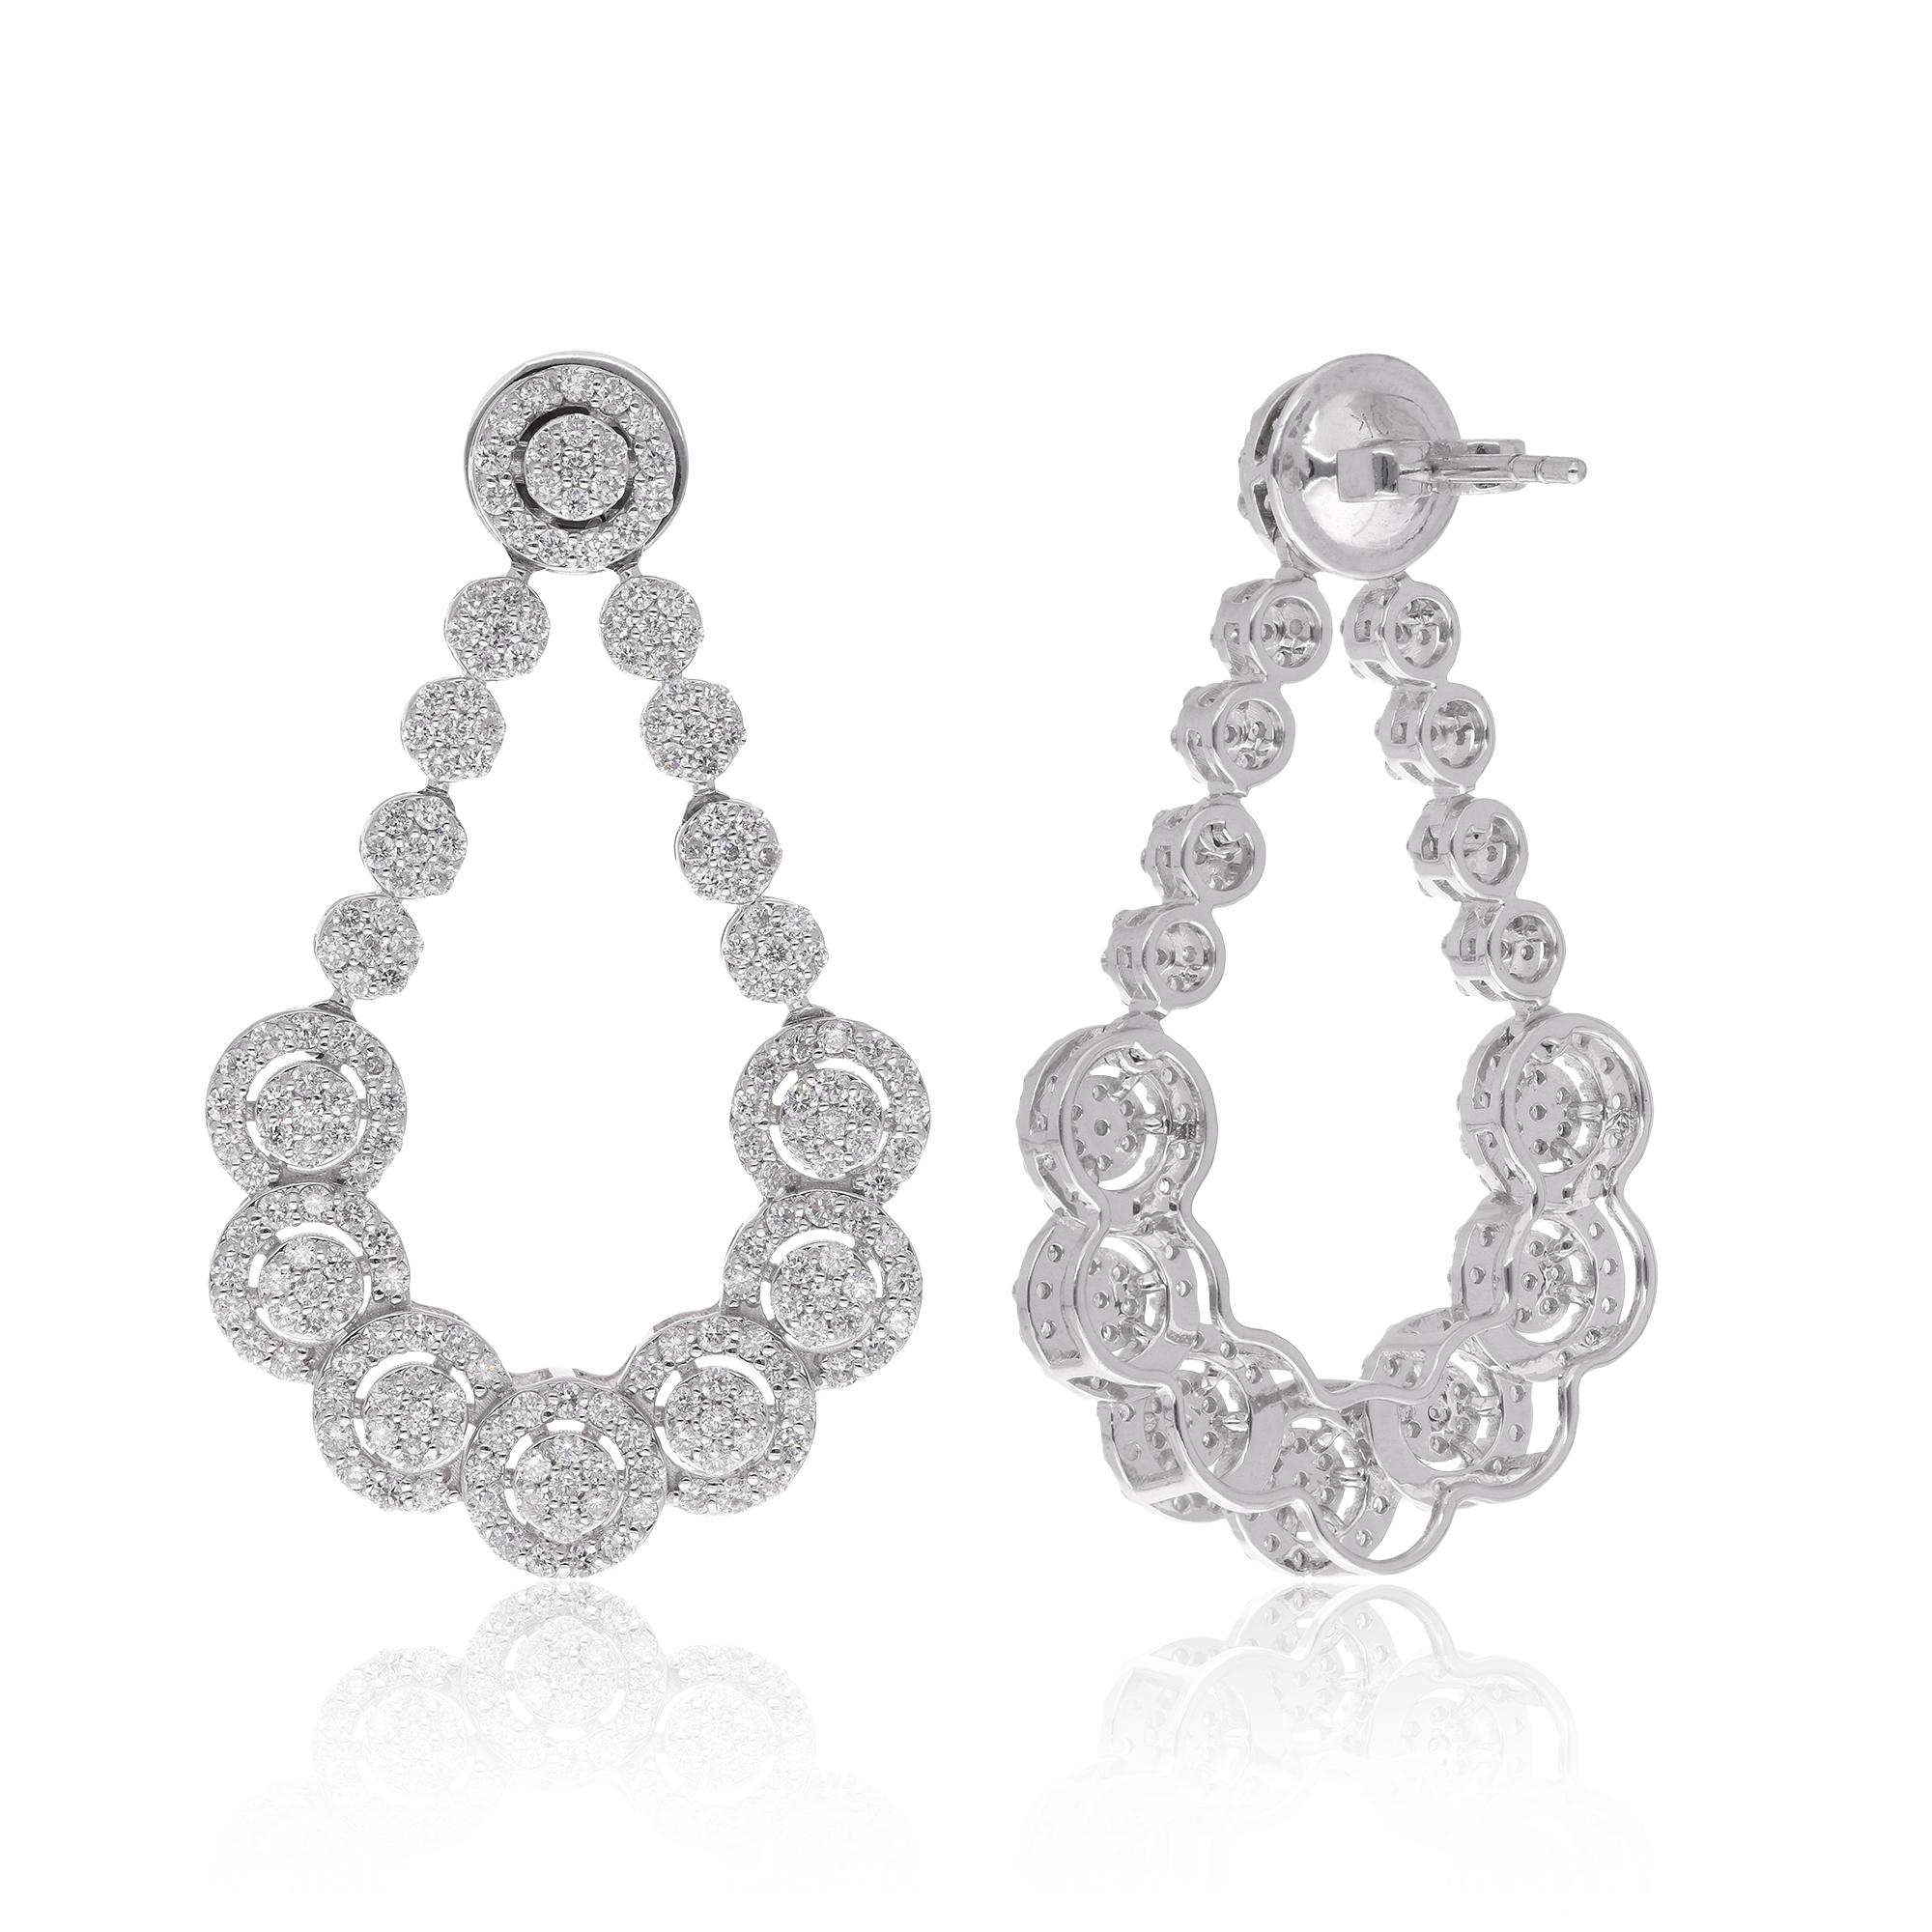 The dangle design allows the earrings to sway and move gracefully, catching the light and showcasing the brilliance of the diamonds. The length and style of the dangle can vary, depending on the specific design of the earrings.

Item Code :-